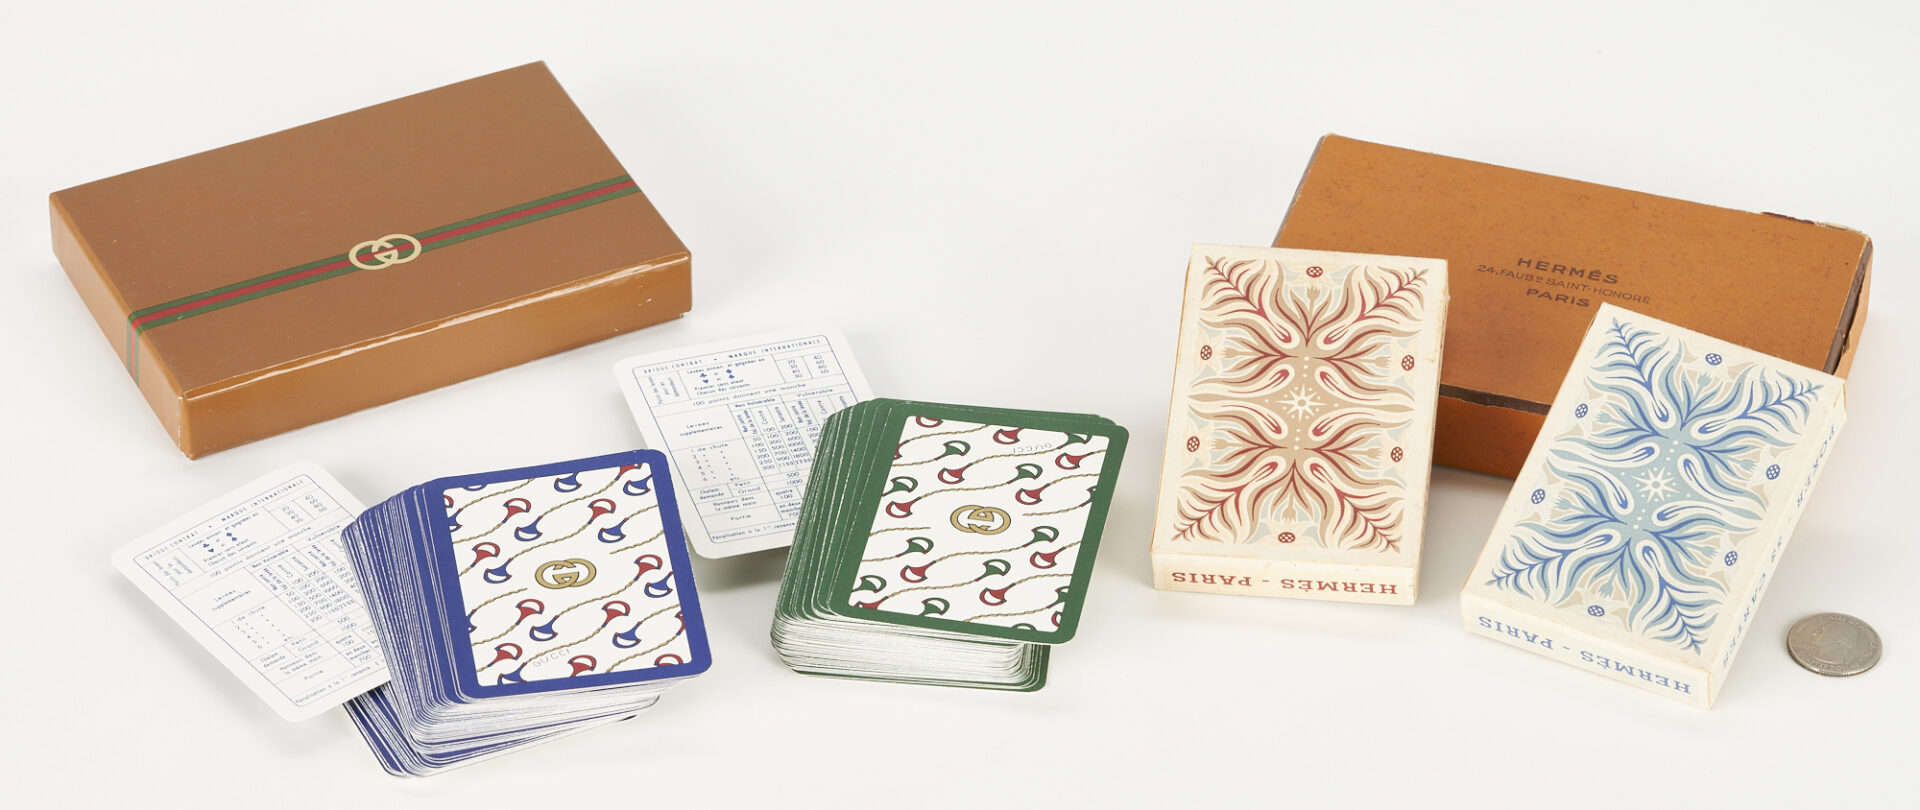 Lot 94: 2 Designer Vintage Playing Card Boxed Sets, Hermes by A.M. Cassandre & Gucci